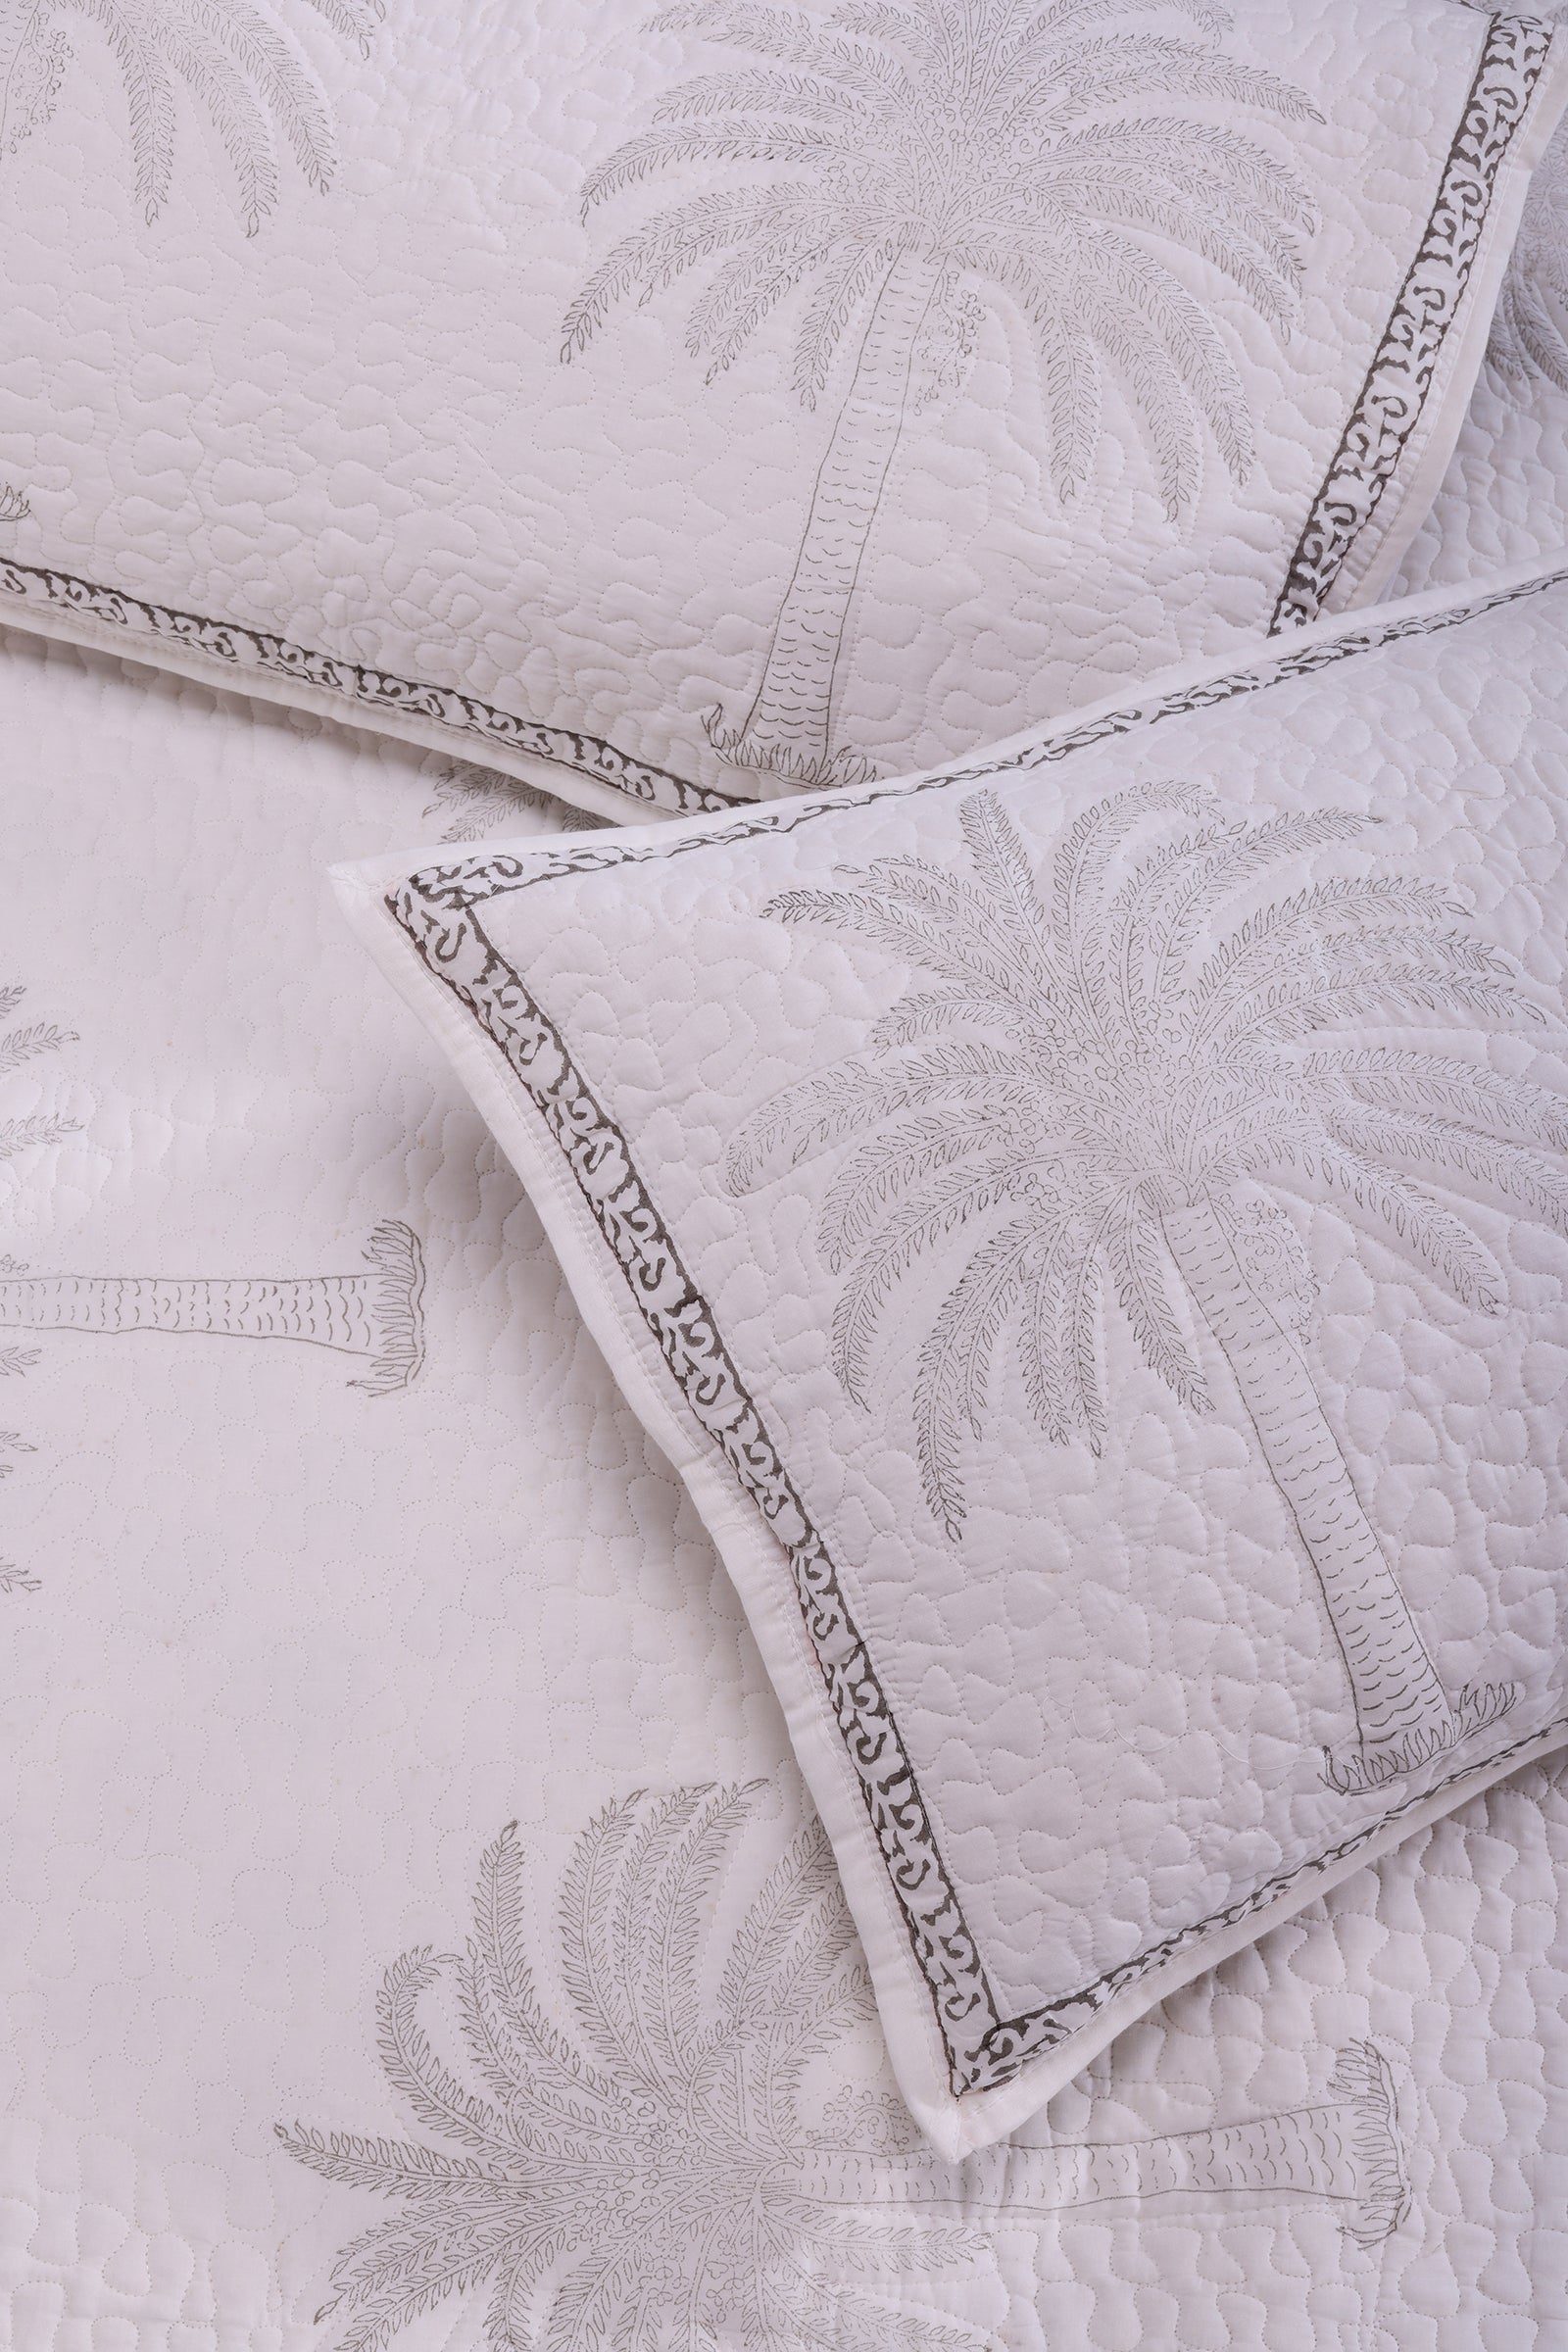 Anoob Palm Tree Hand Block Printed Grey Quilted Cotton Bedcover - shahenazindia